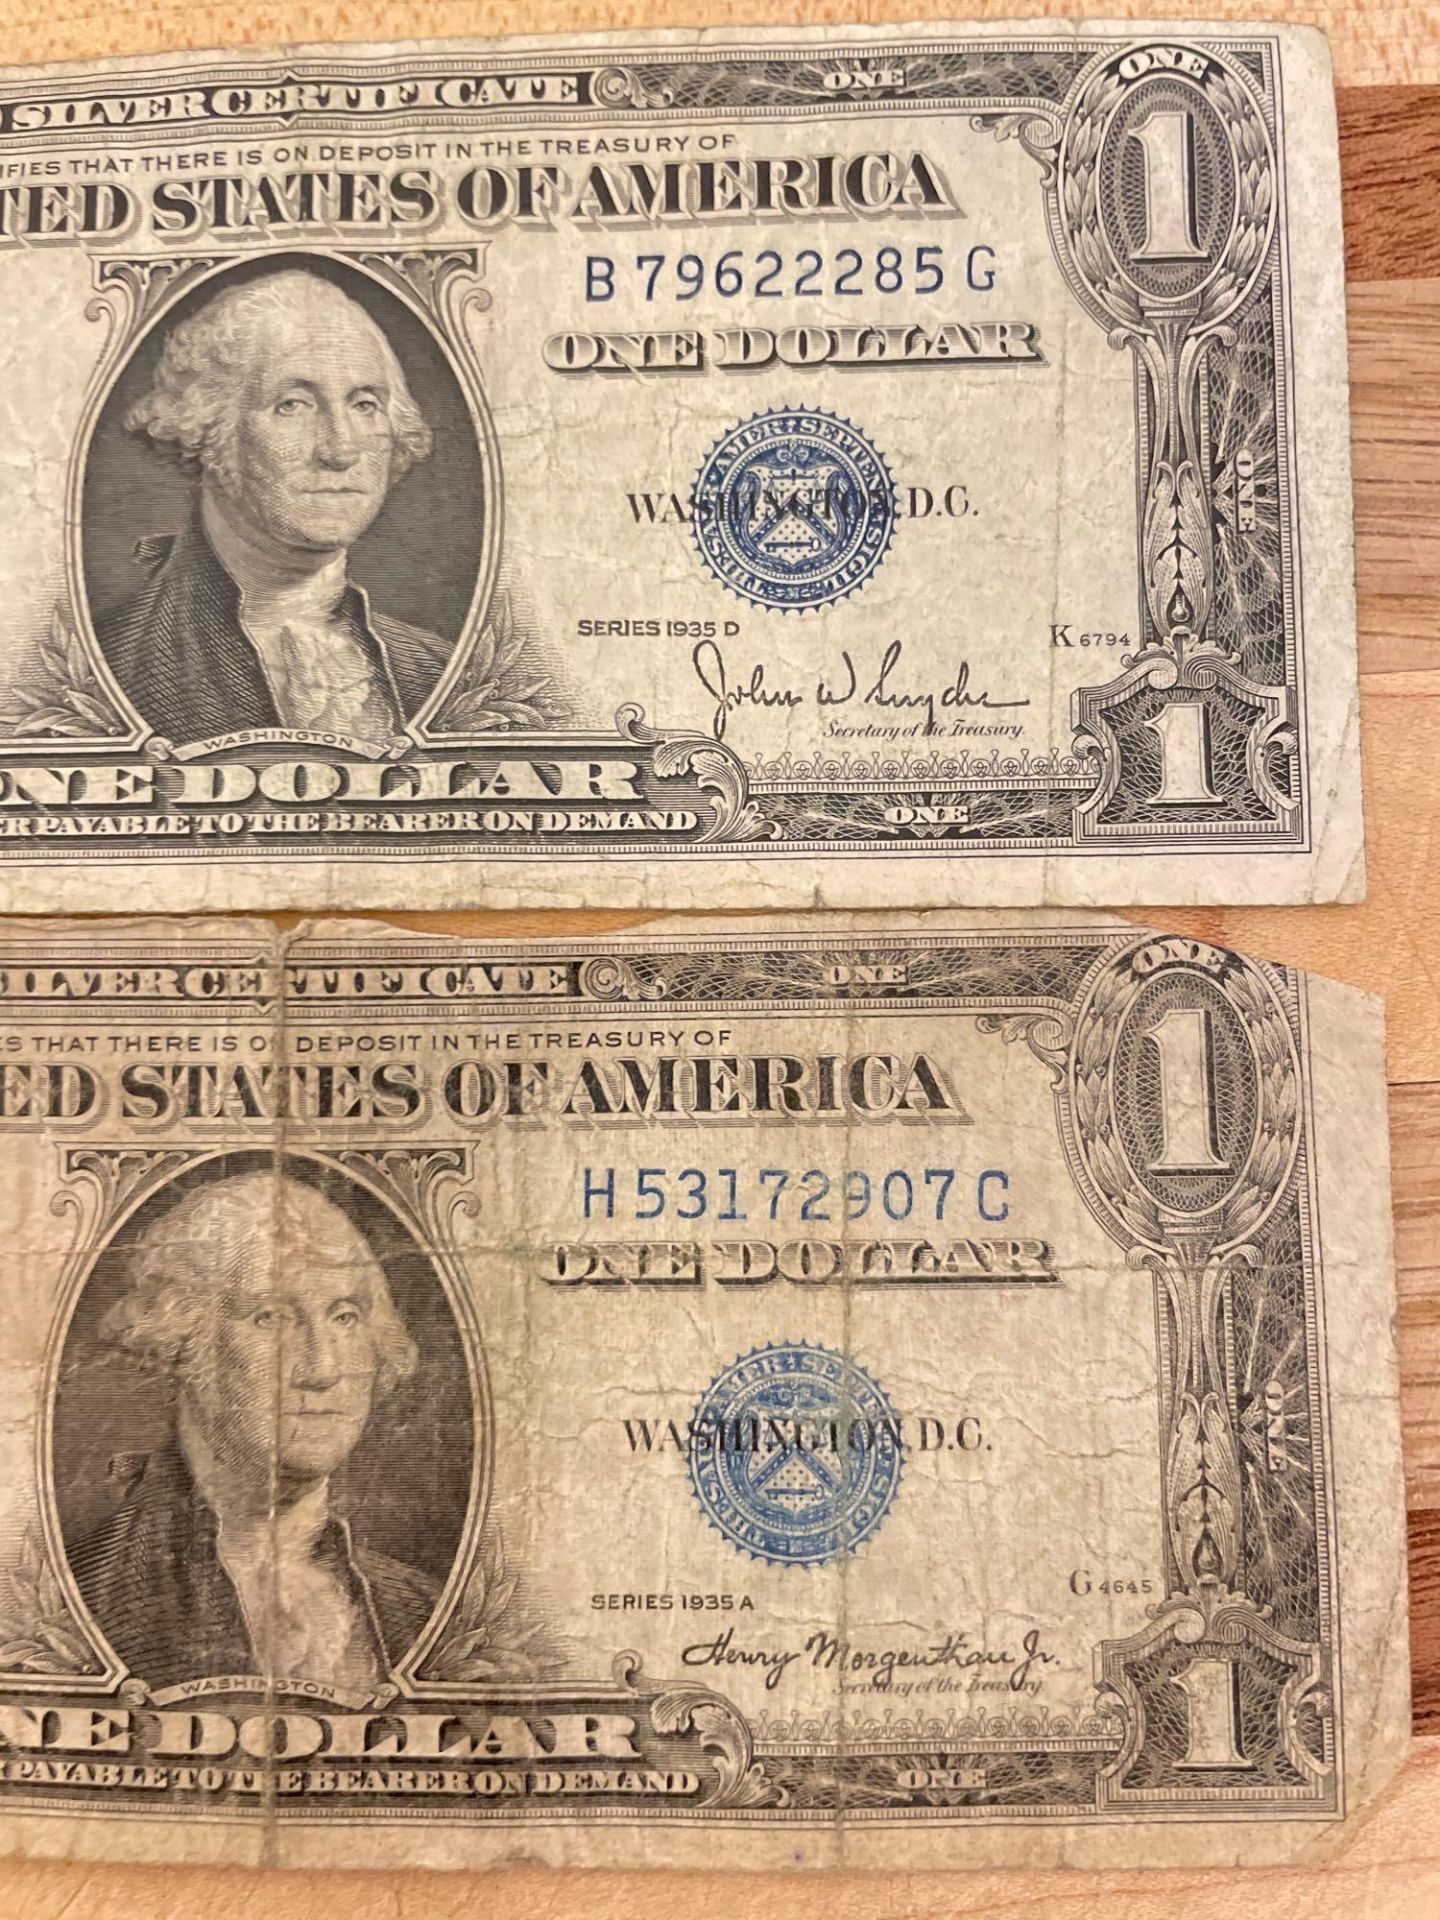 1935A $1 Silver Certificate & 1935D $1 Silver Certificate - Image 2 of 3